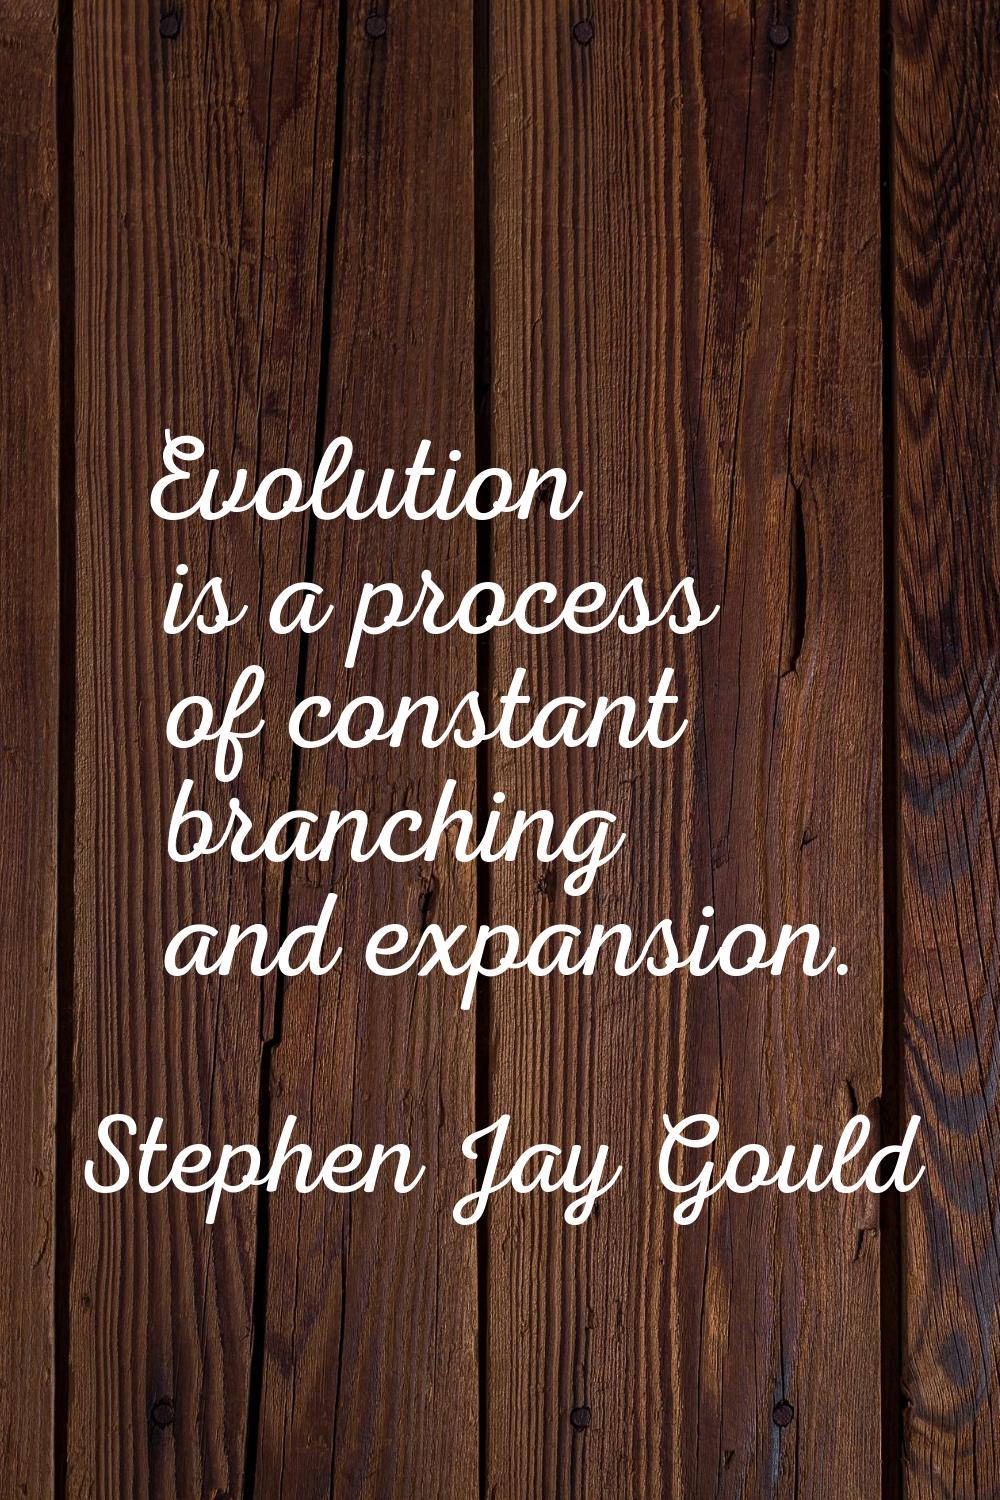 Evolution is a process of constant branching and expansion.